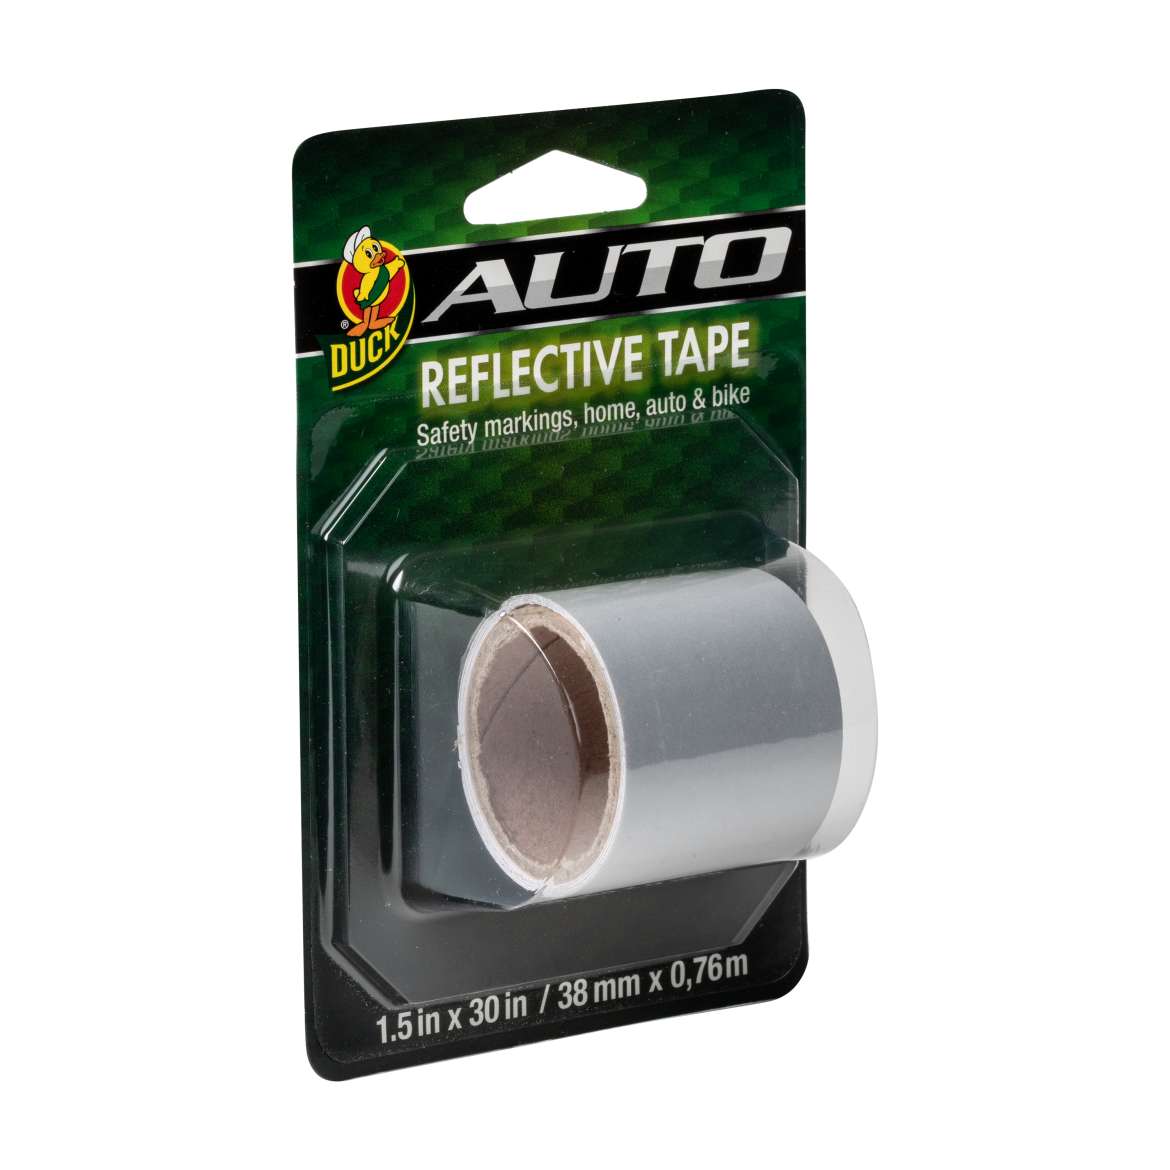 Reflective Tape- White, 1.5 in. x 30 in. | Duck Brand